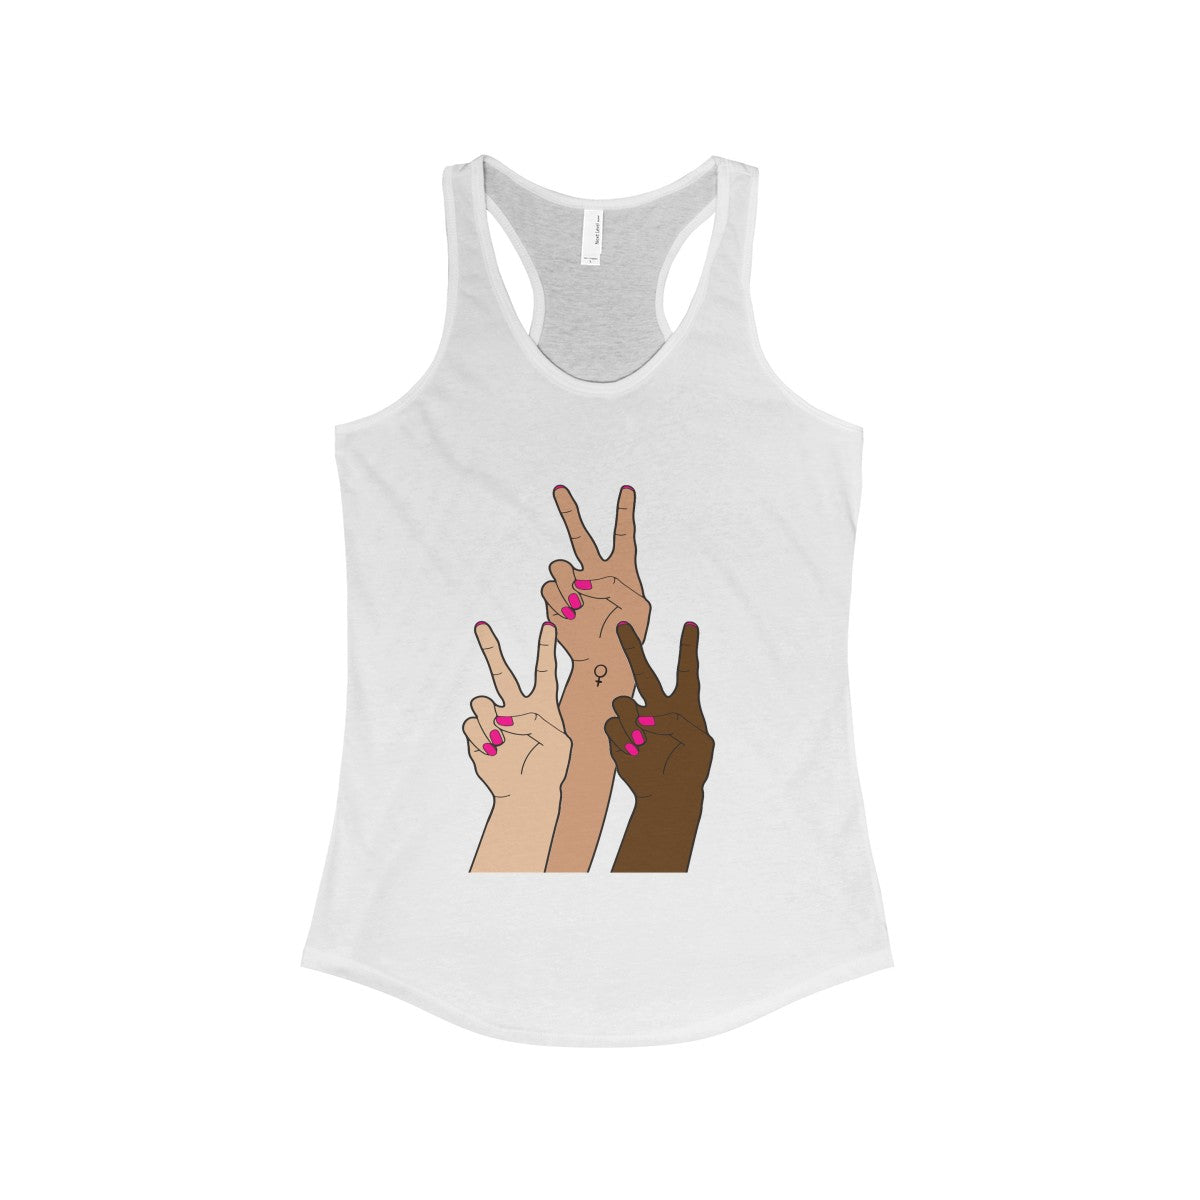 3 Peace Unity Equality Feminist  Racer Back Tank - Shop Bed Head Society